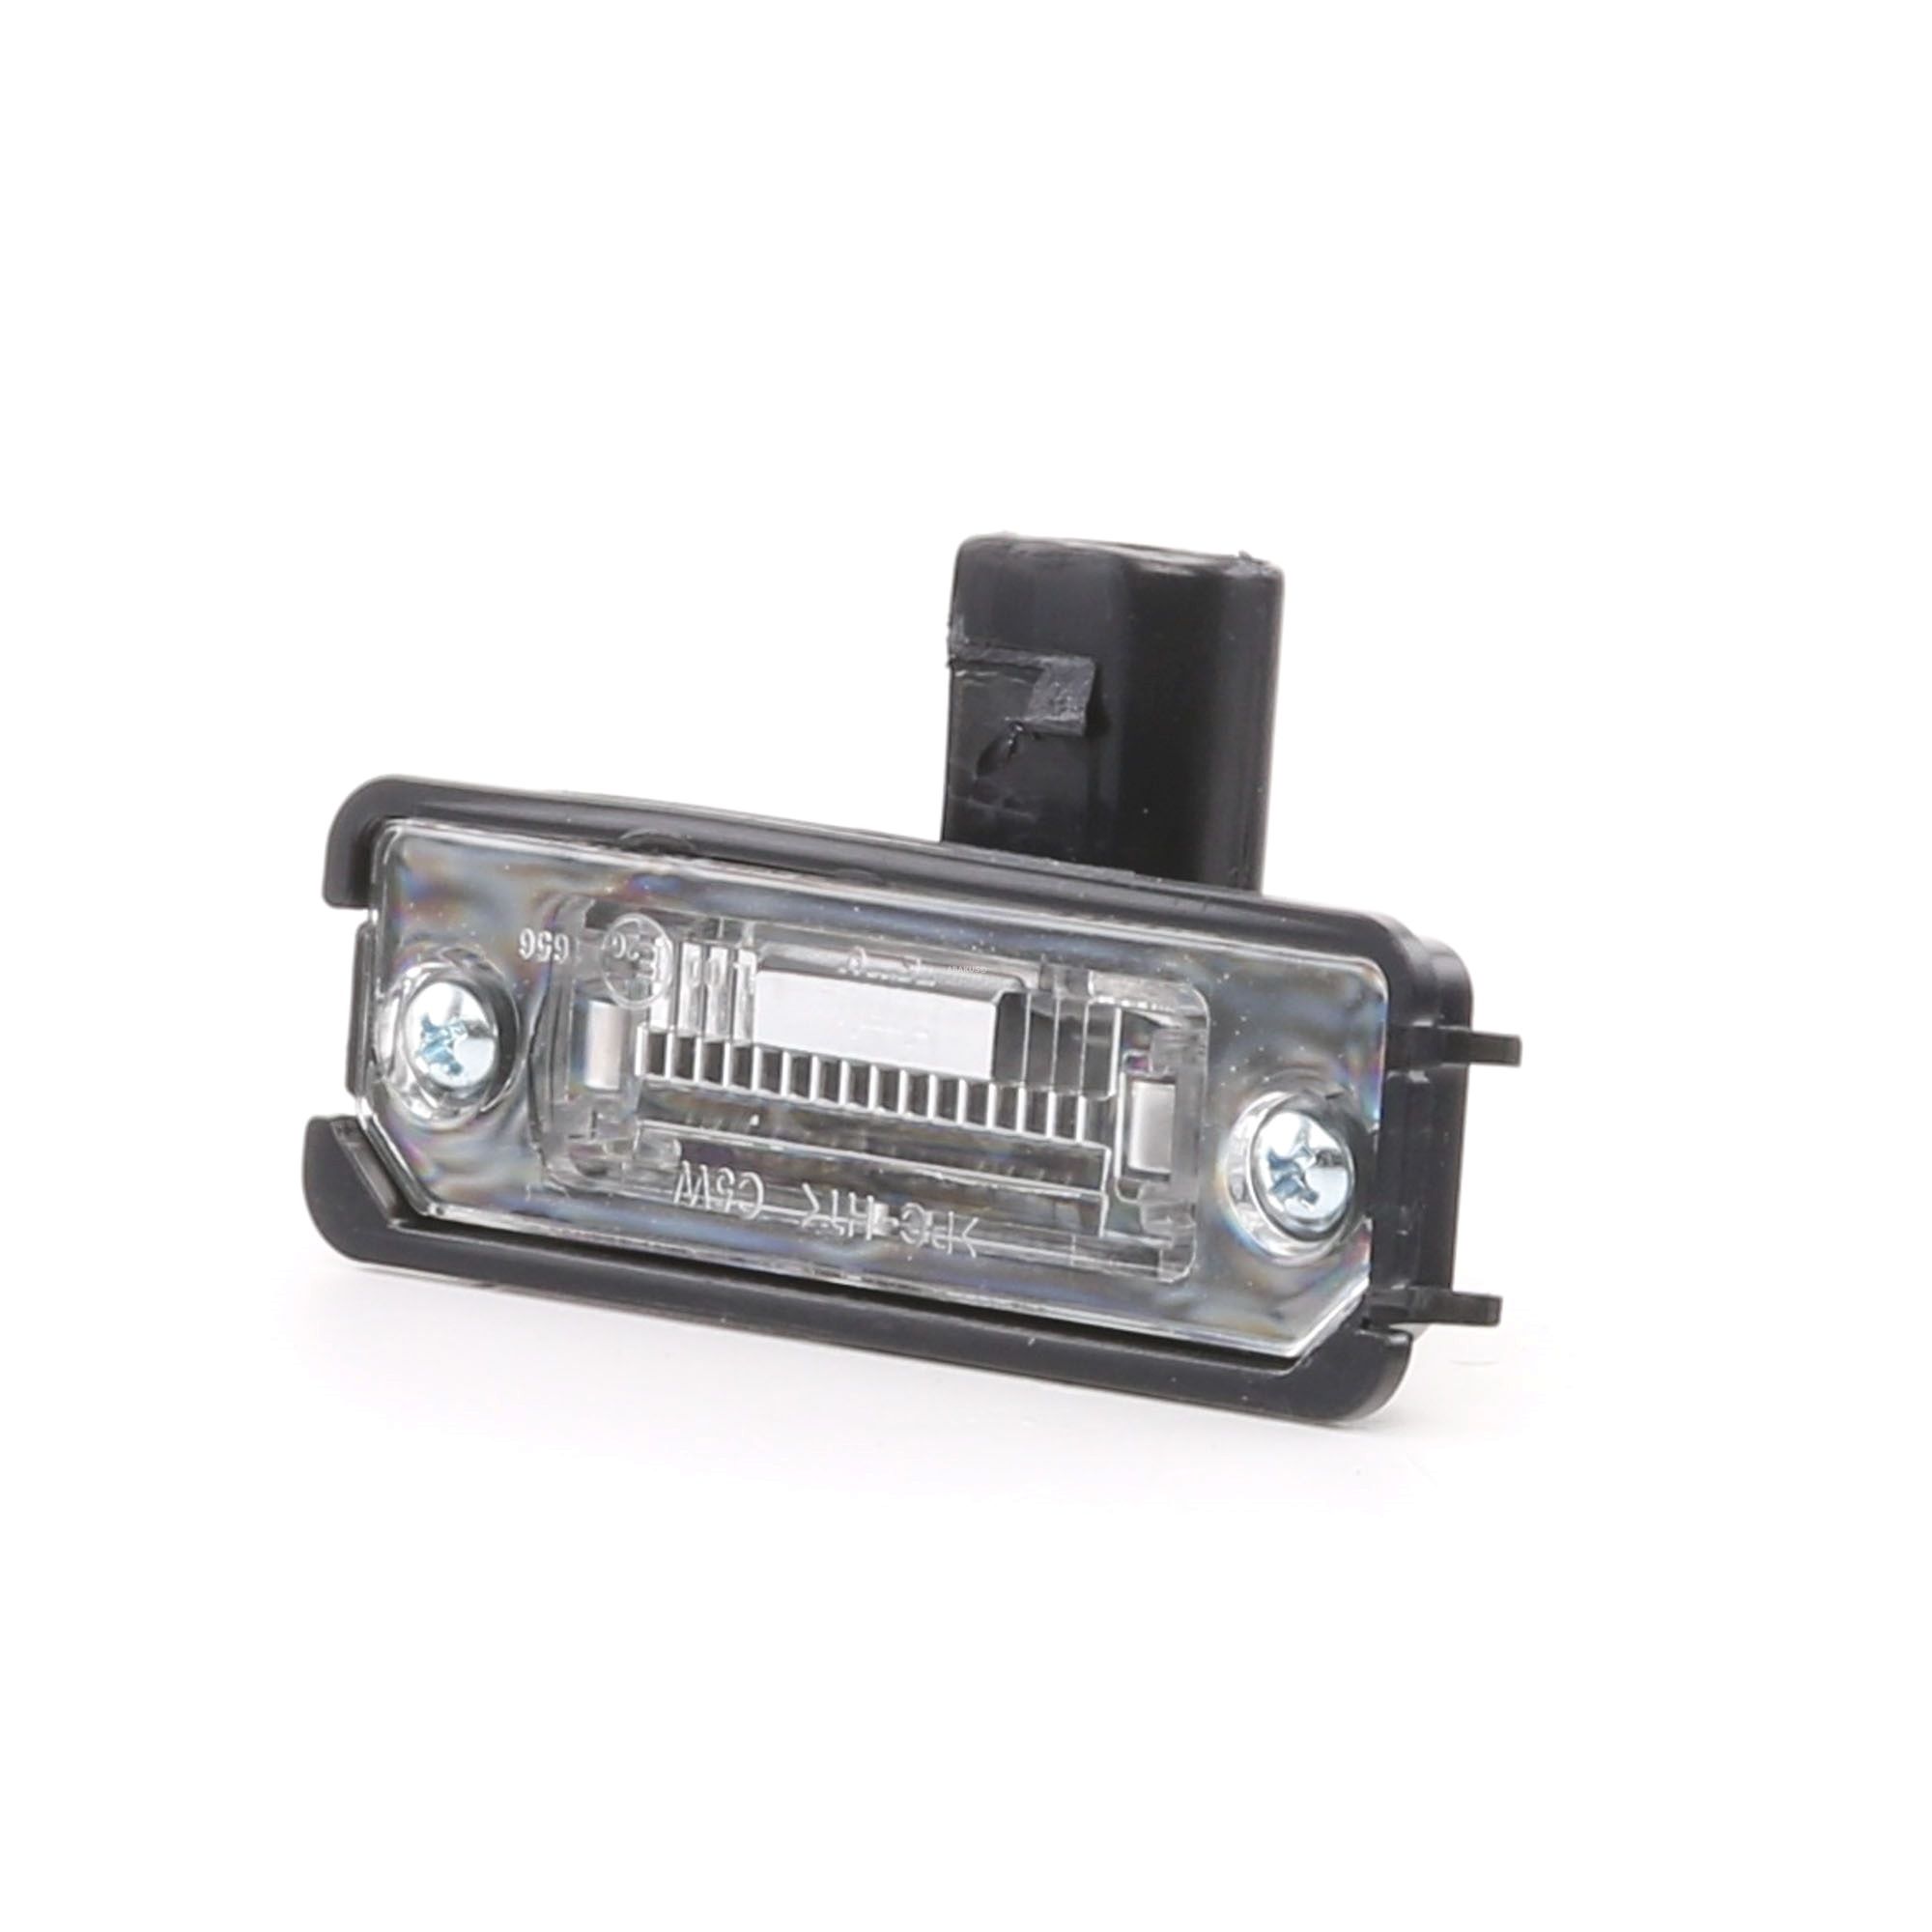 Volkswagen Licence Plate Light ABAKUS 053-12-900 at a good price